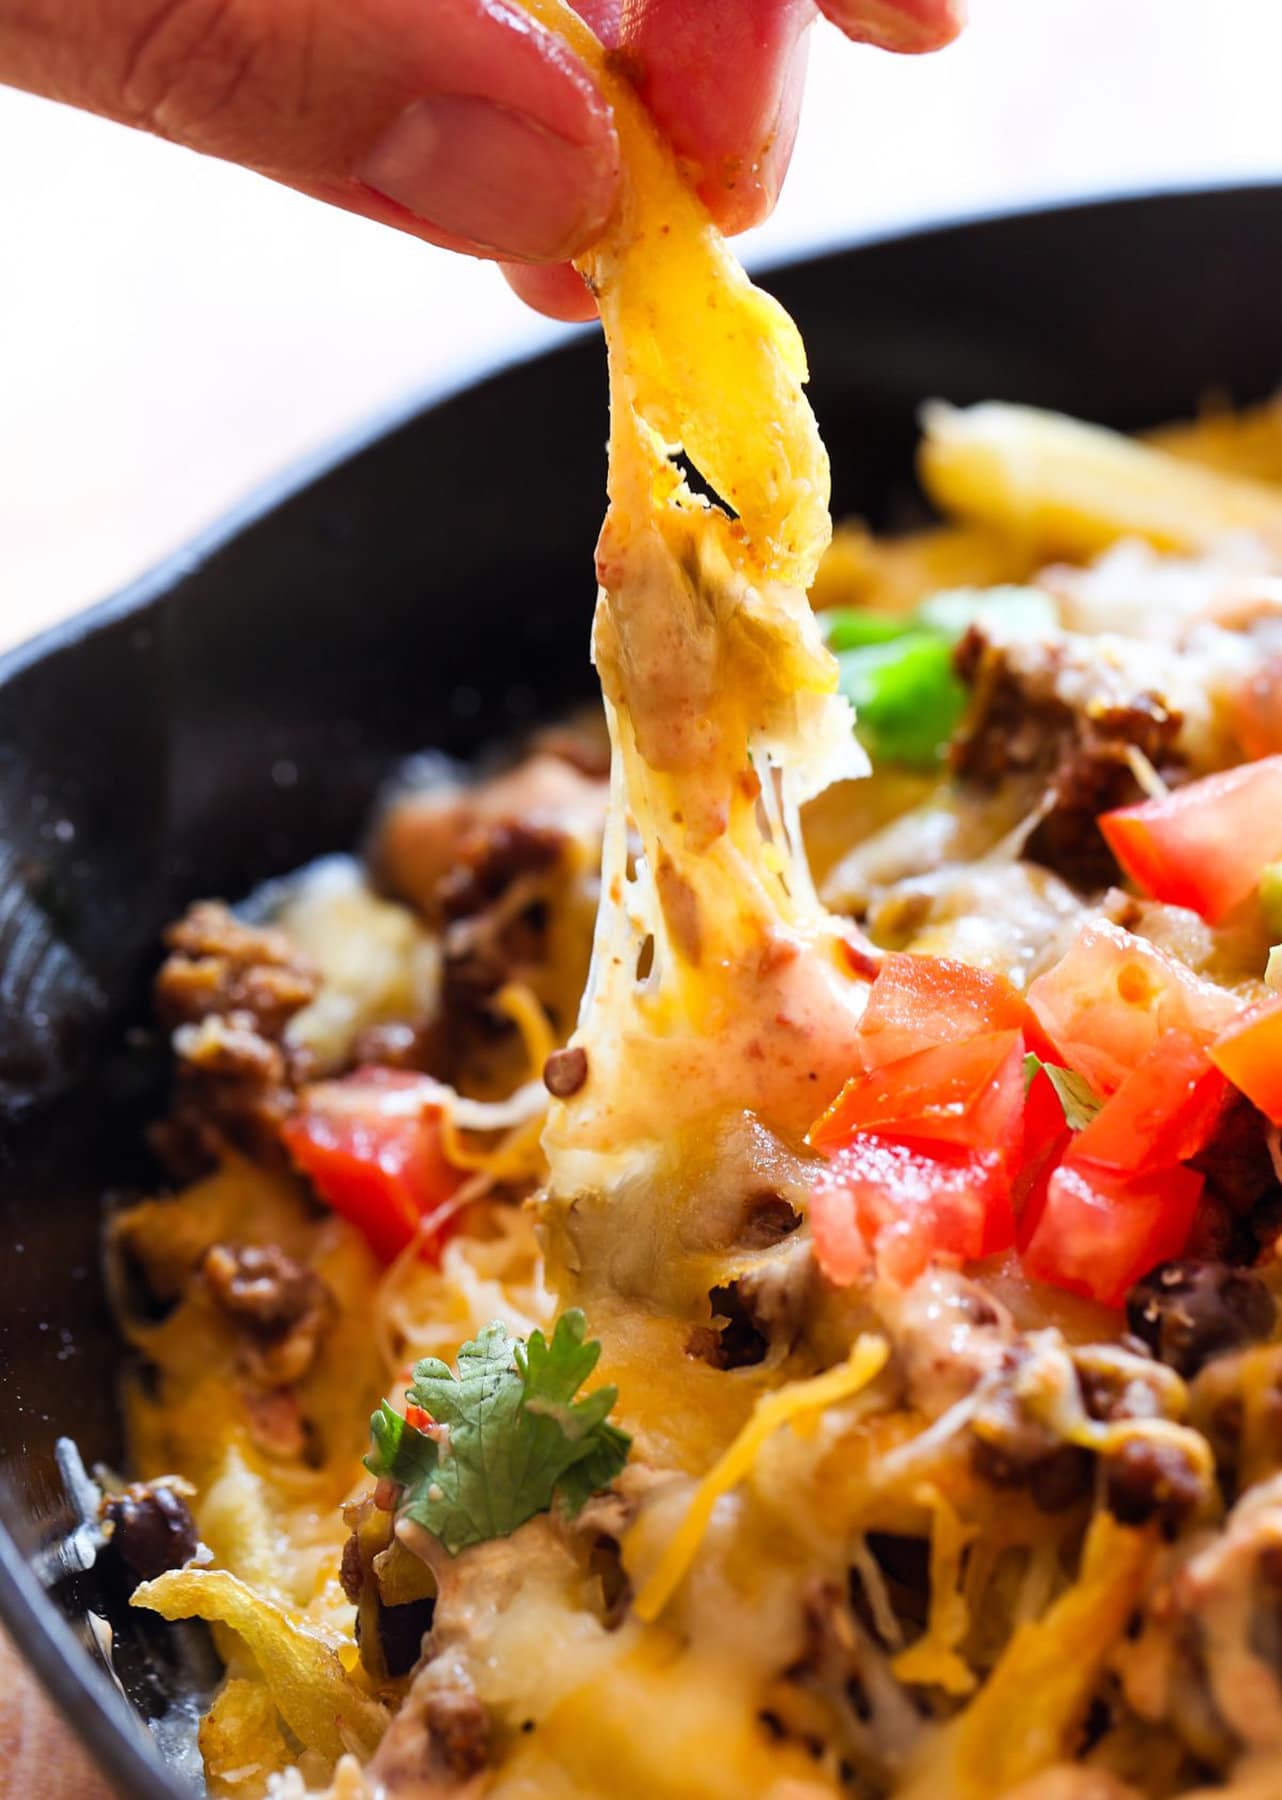 Skillet Frachos showing cheese pull